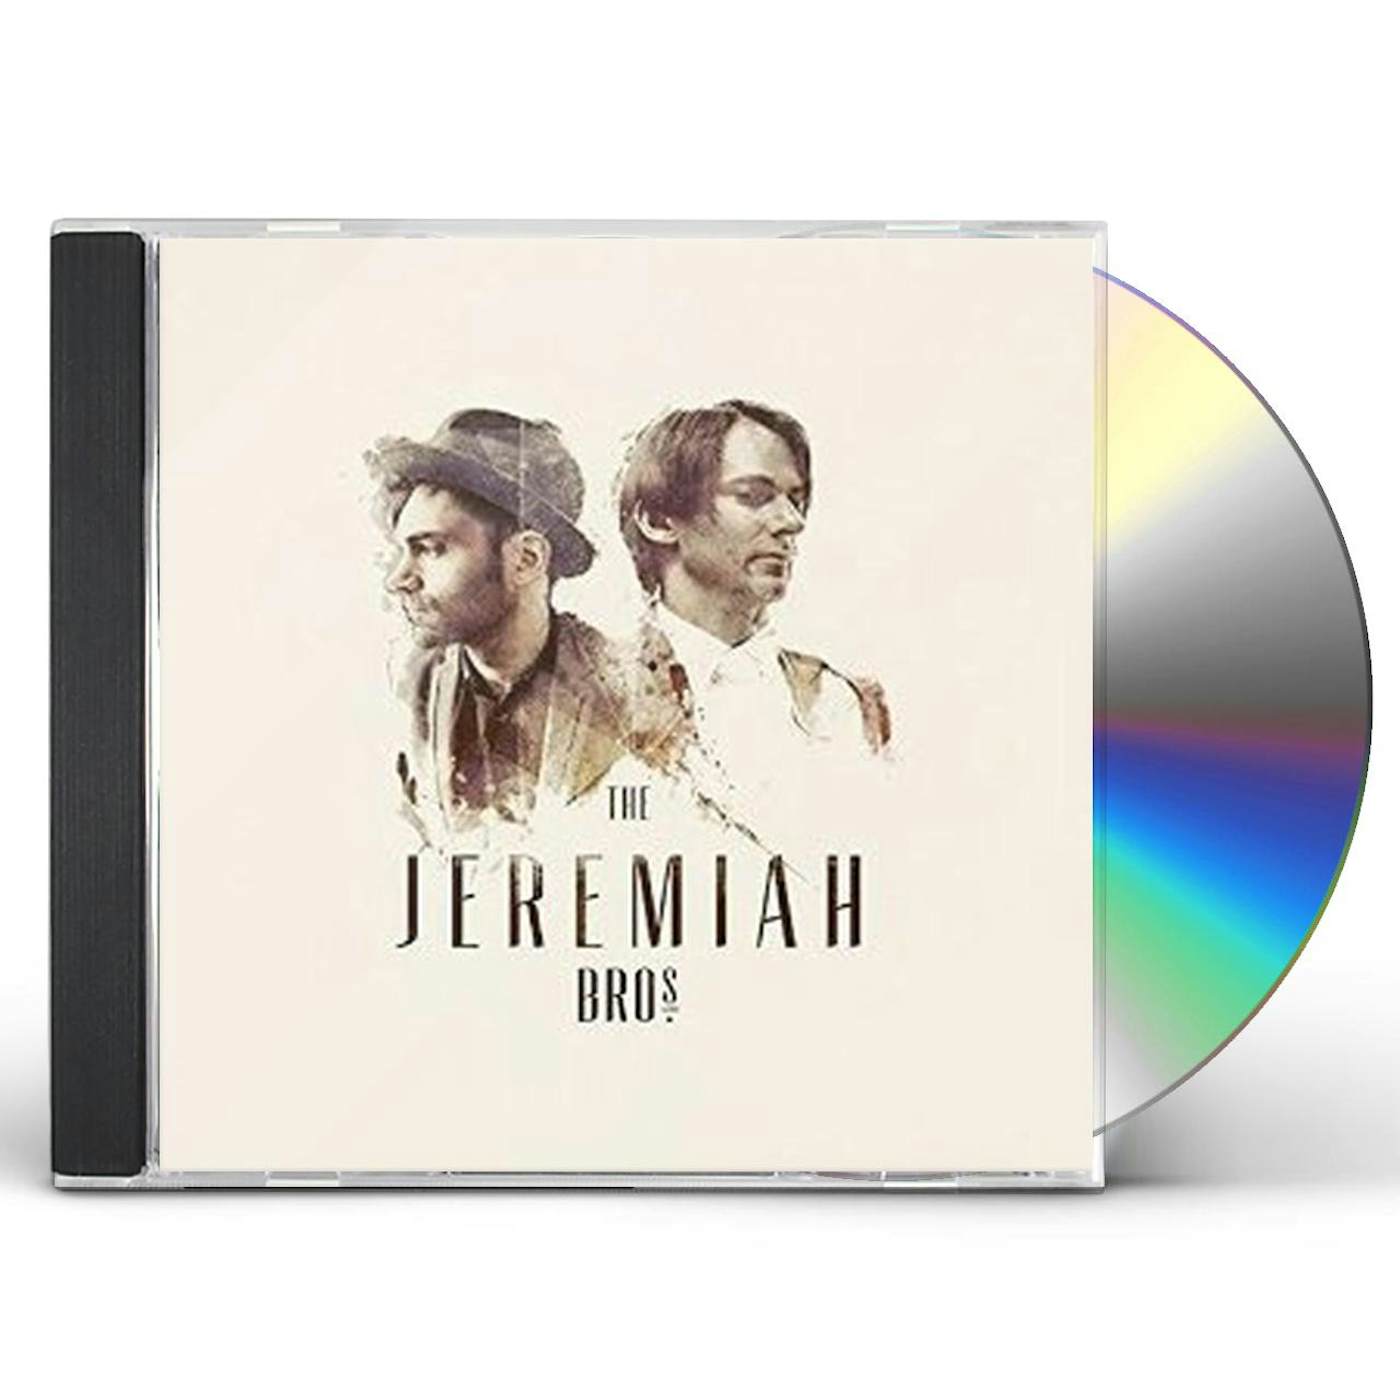 The Jeremiah Brothers CD